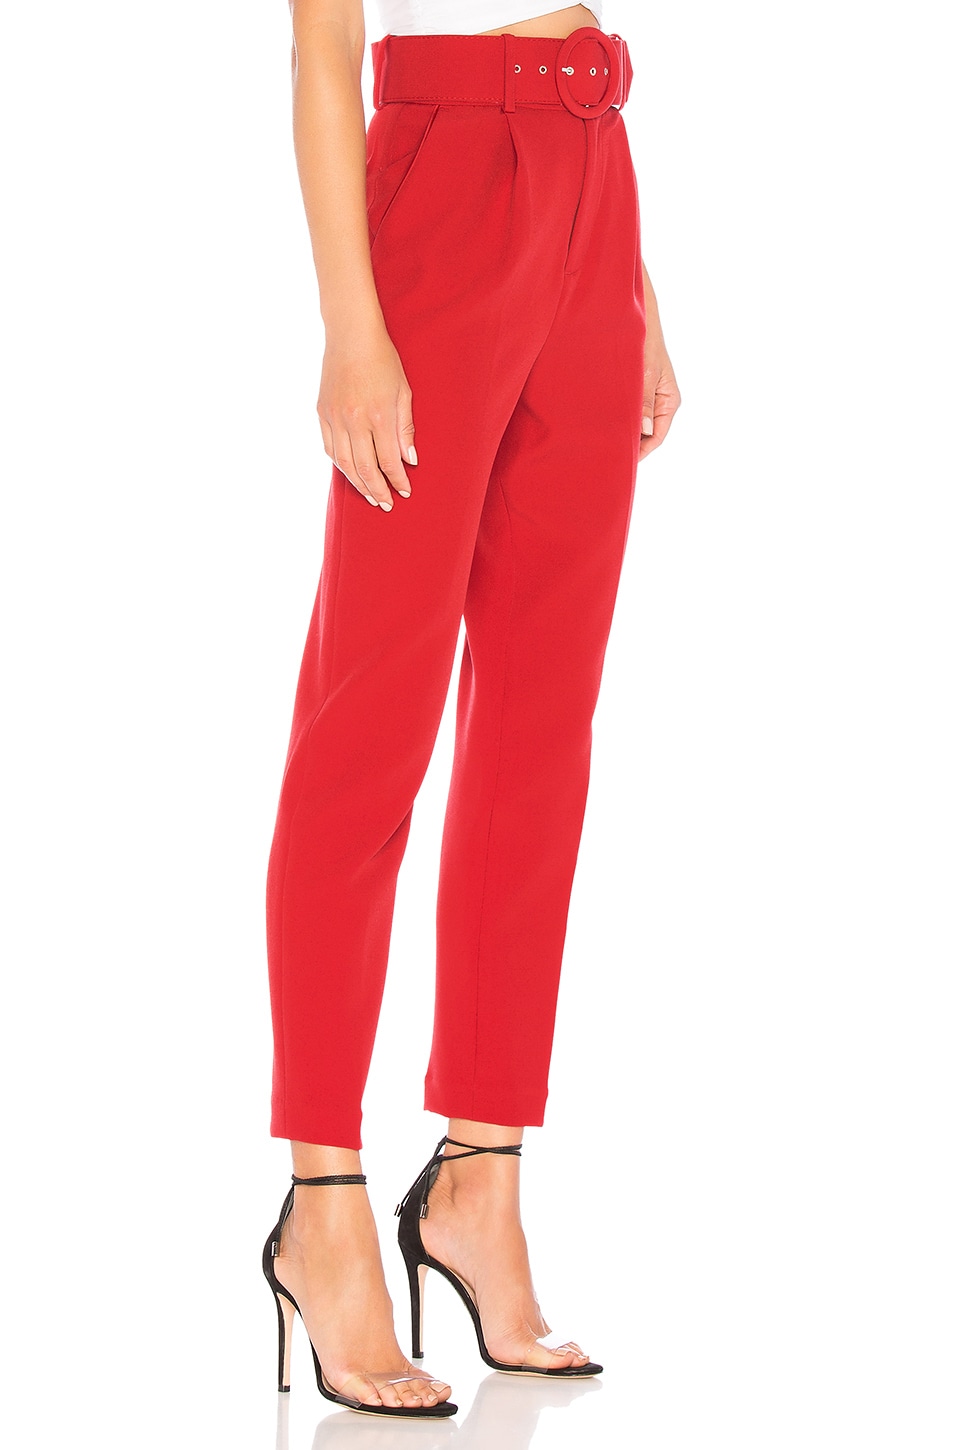 L'Academie The Mia Pant in Scarlet Red | REVOLVE